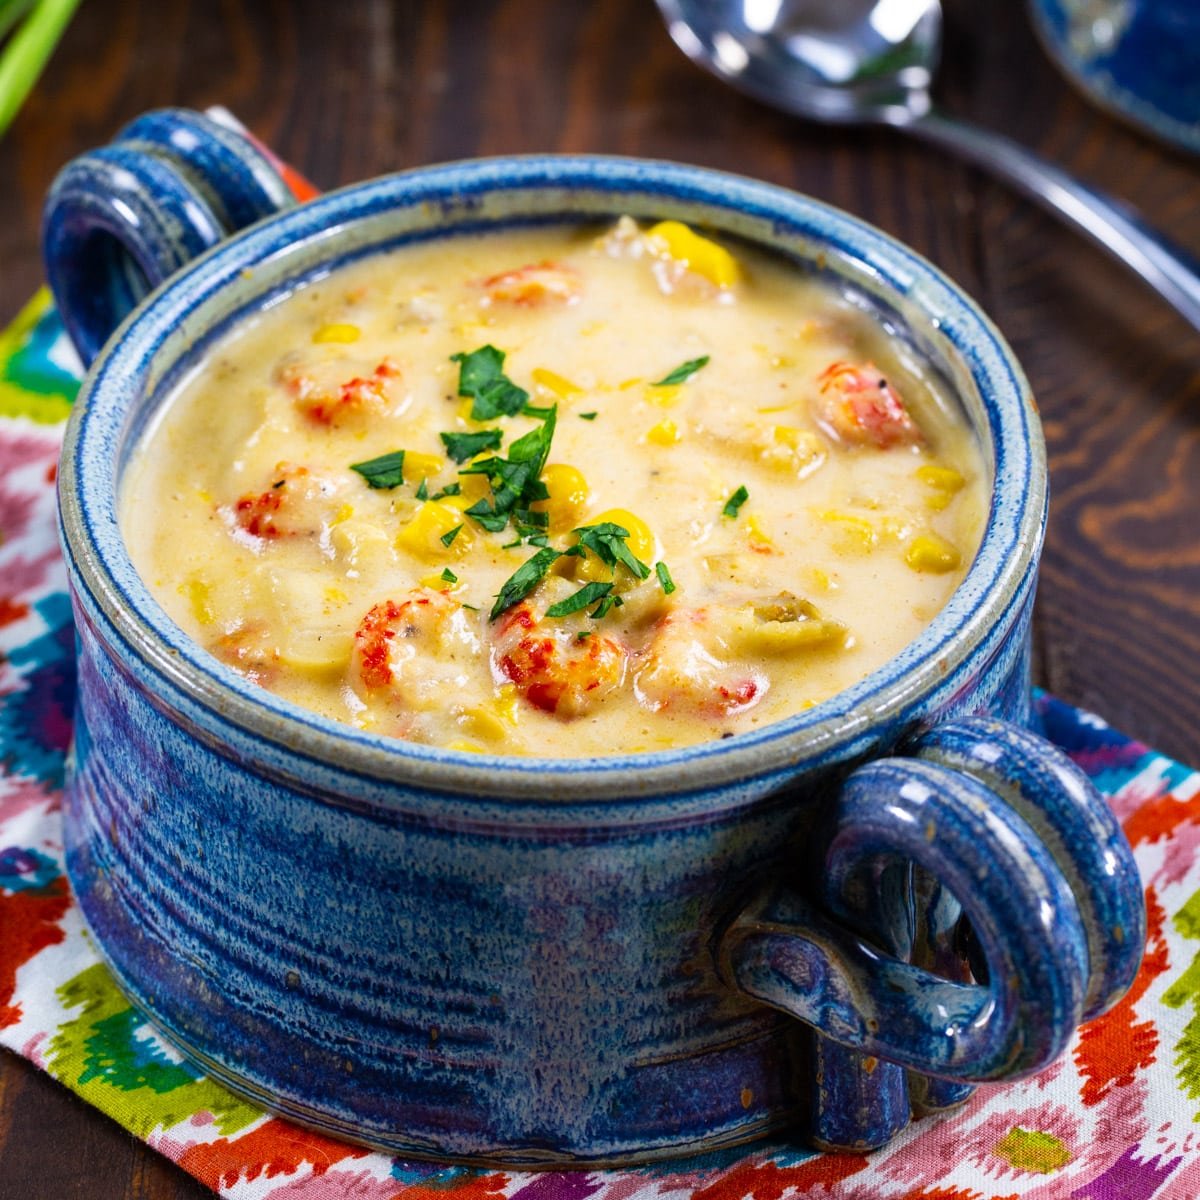 Corn and Crawfish Chowder in a bowl.